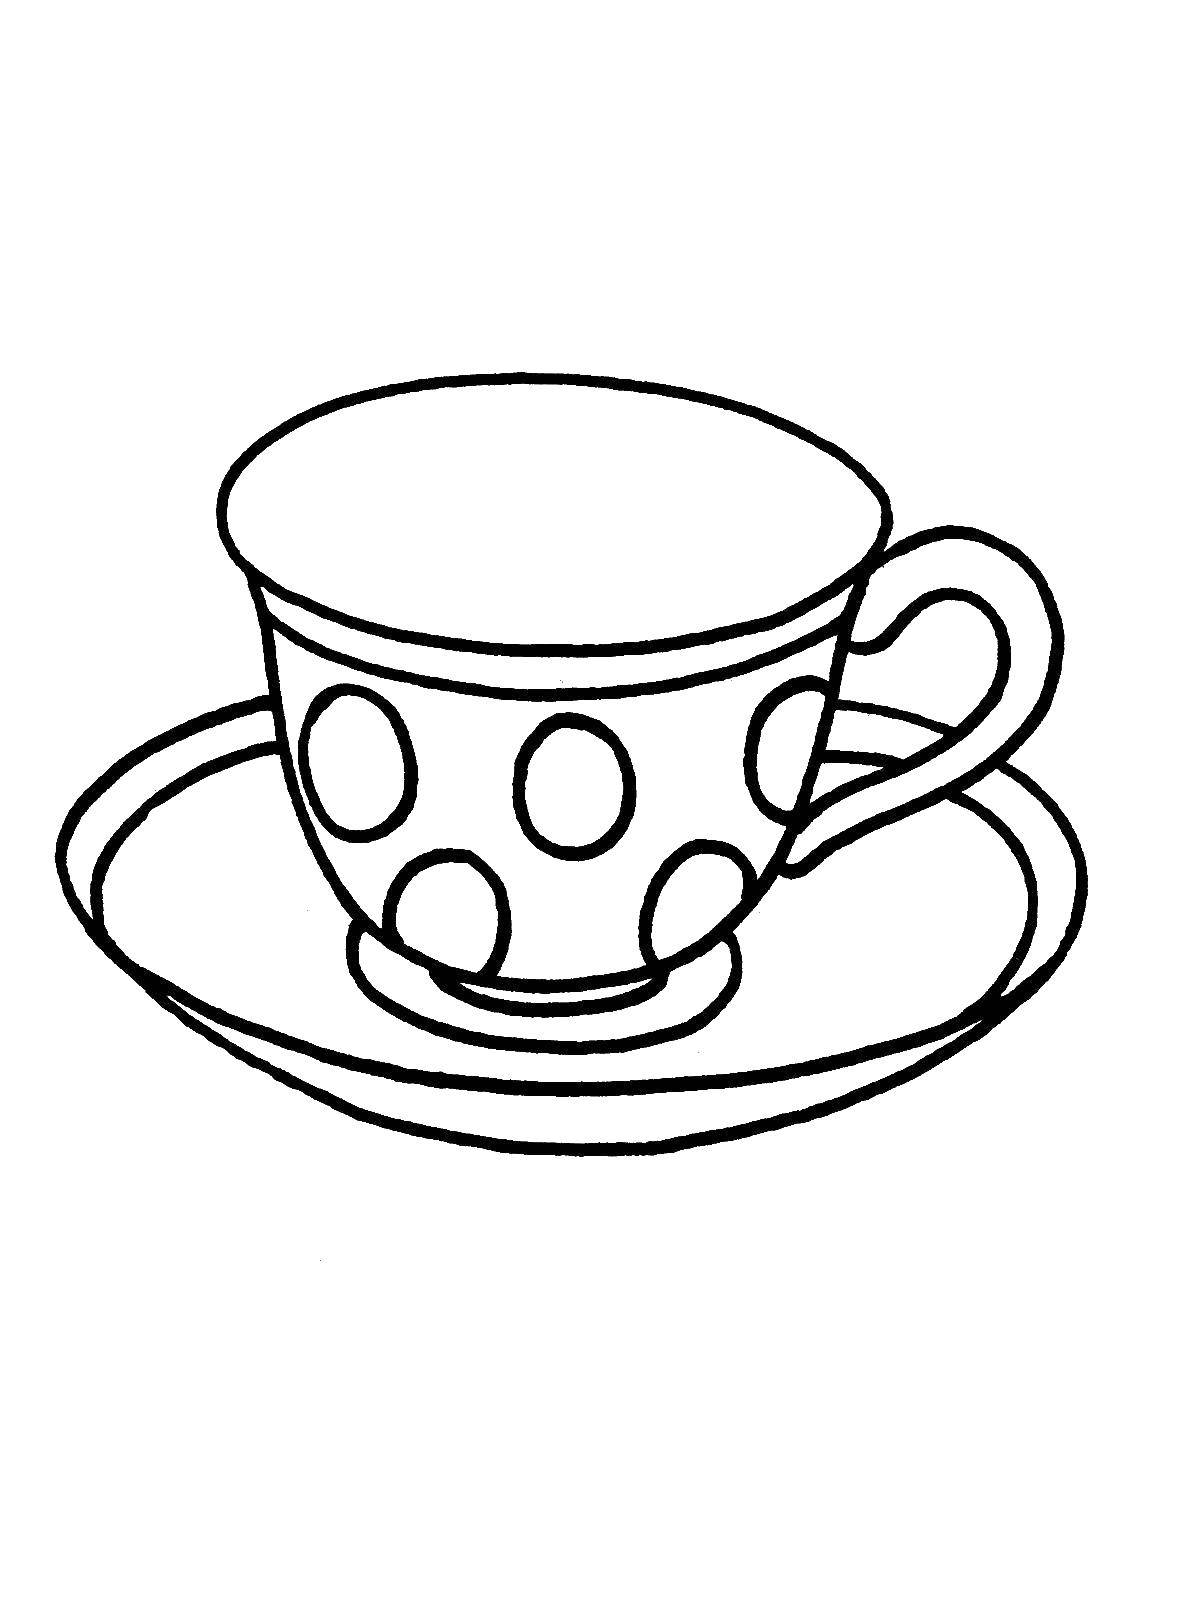 Coloring Cup and saucer. Category coloring. Tags:  crockery, Cup, mug, saucer.